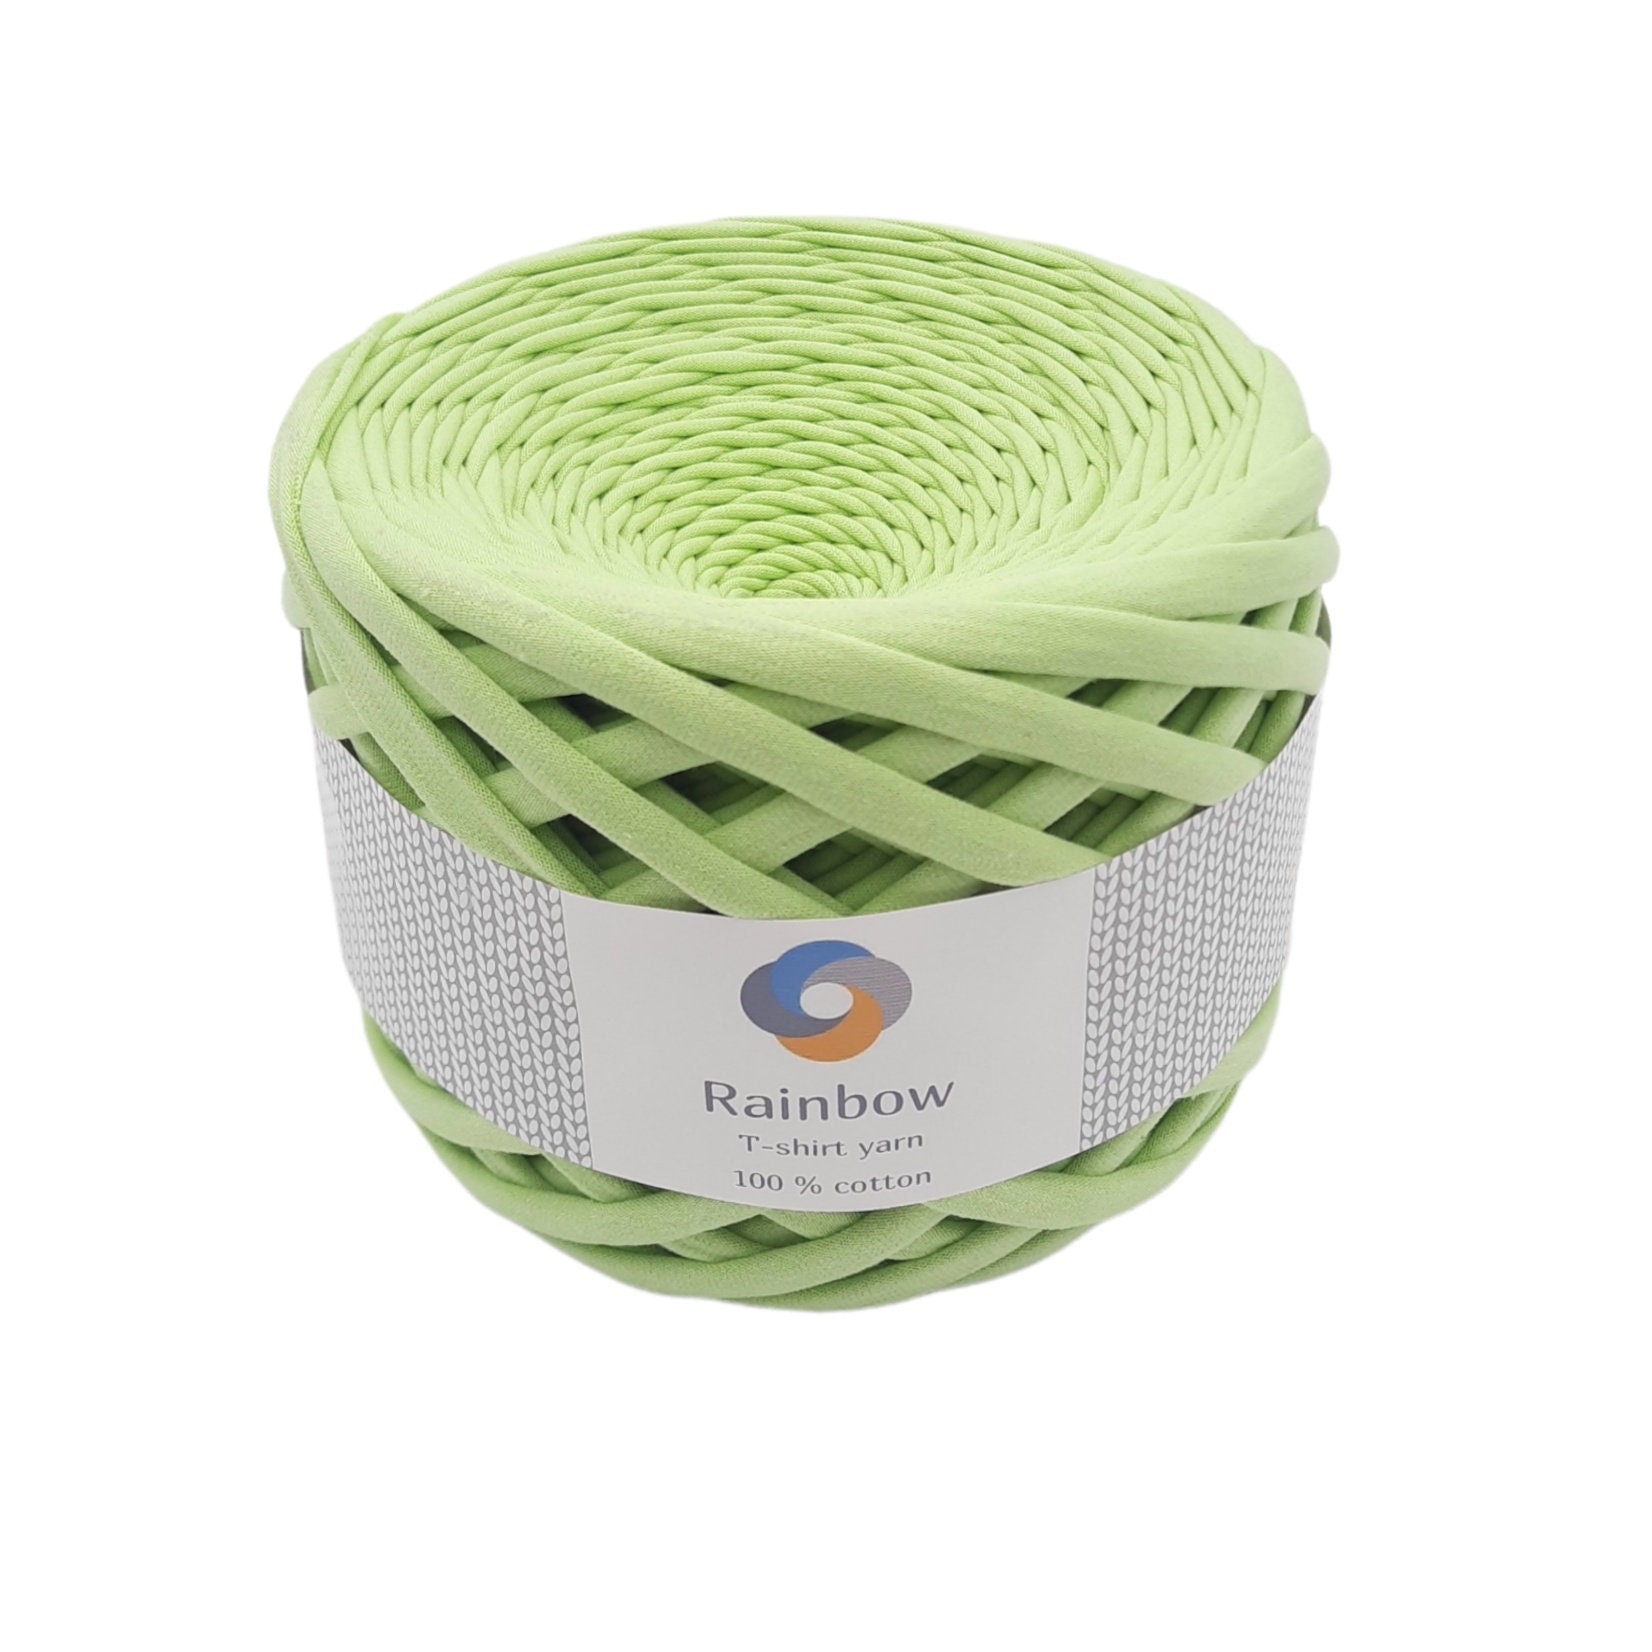 Tshirt Crochet Yarn. Yarn for Bags, Baskets, Carpets,rugs. Macrame,knitting  Cotton Yarn. Green Pistachio Color 7-9 or 5-7 Mm Thickness 